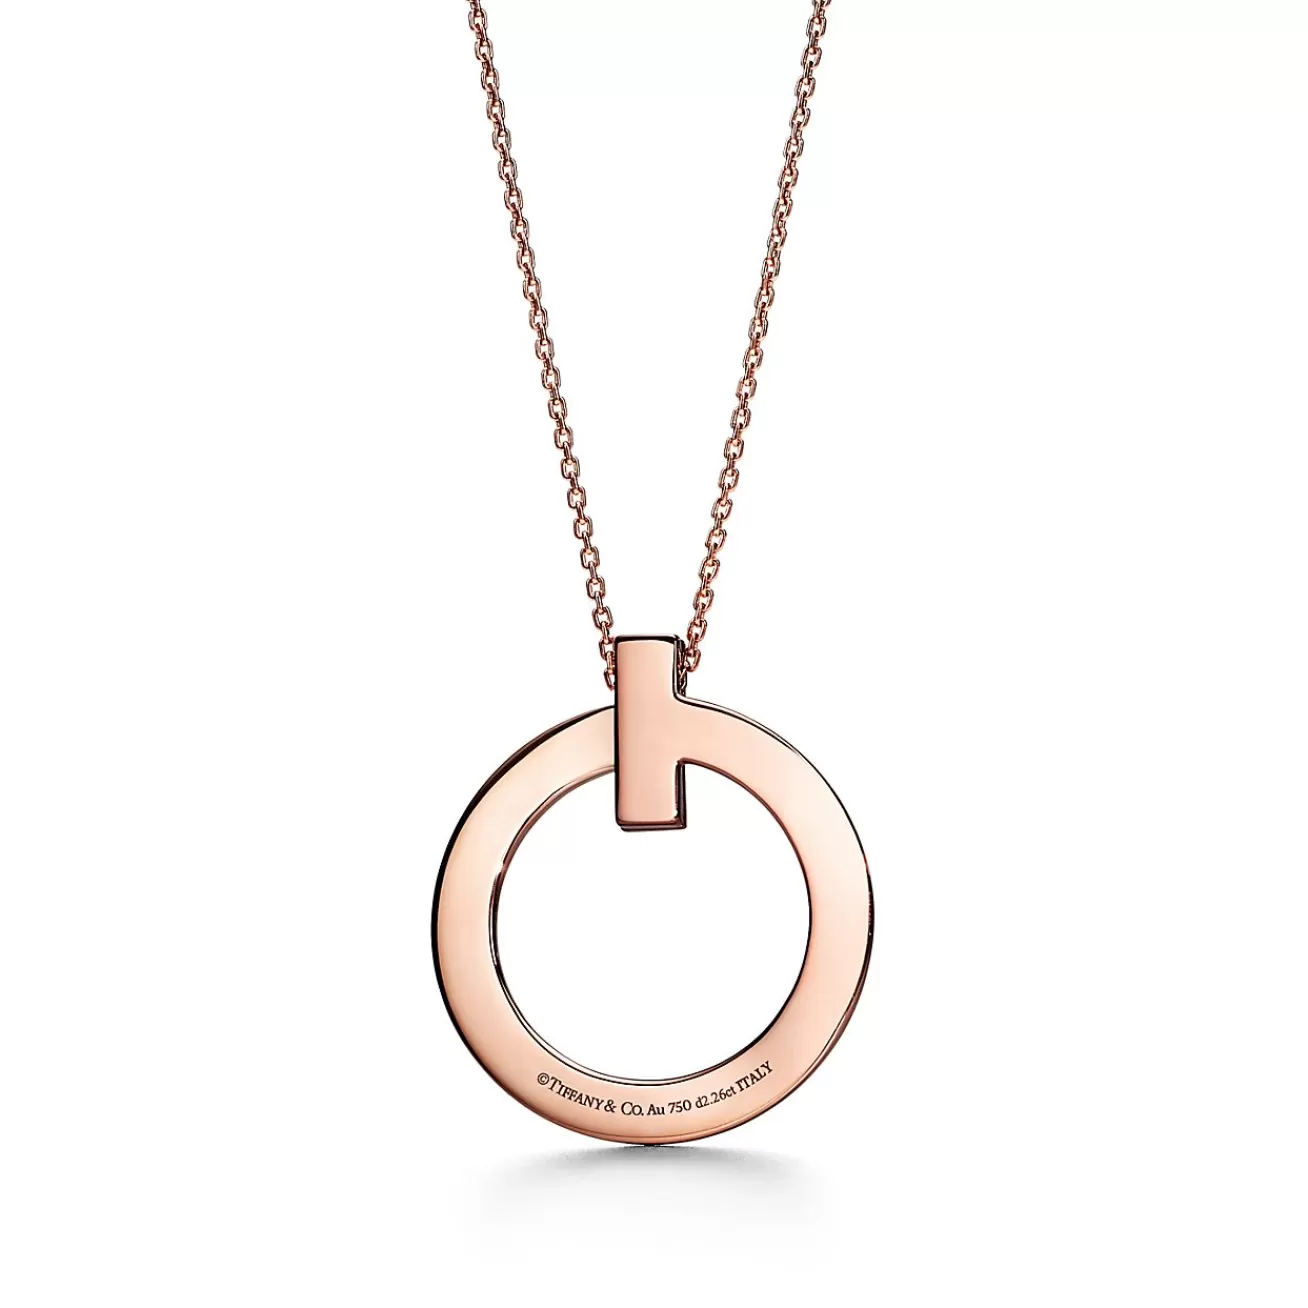 Tiffany & Co. Tiffany T T1 Circle Pendant in 18k Rose Gold with Diamonds, Large | ^ Necklaces & Pendants | Rose Gold Jewelry